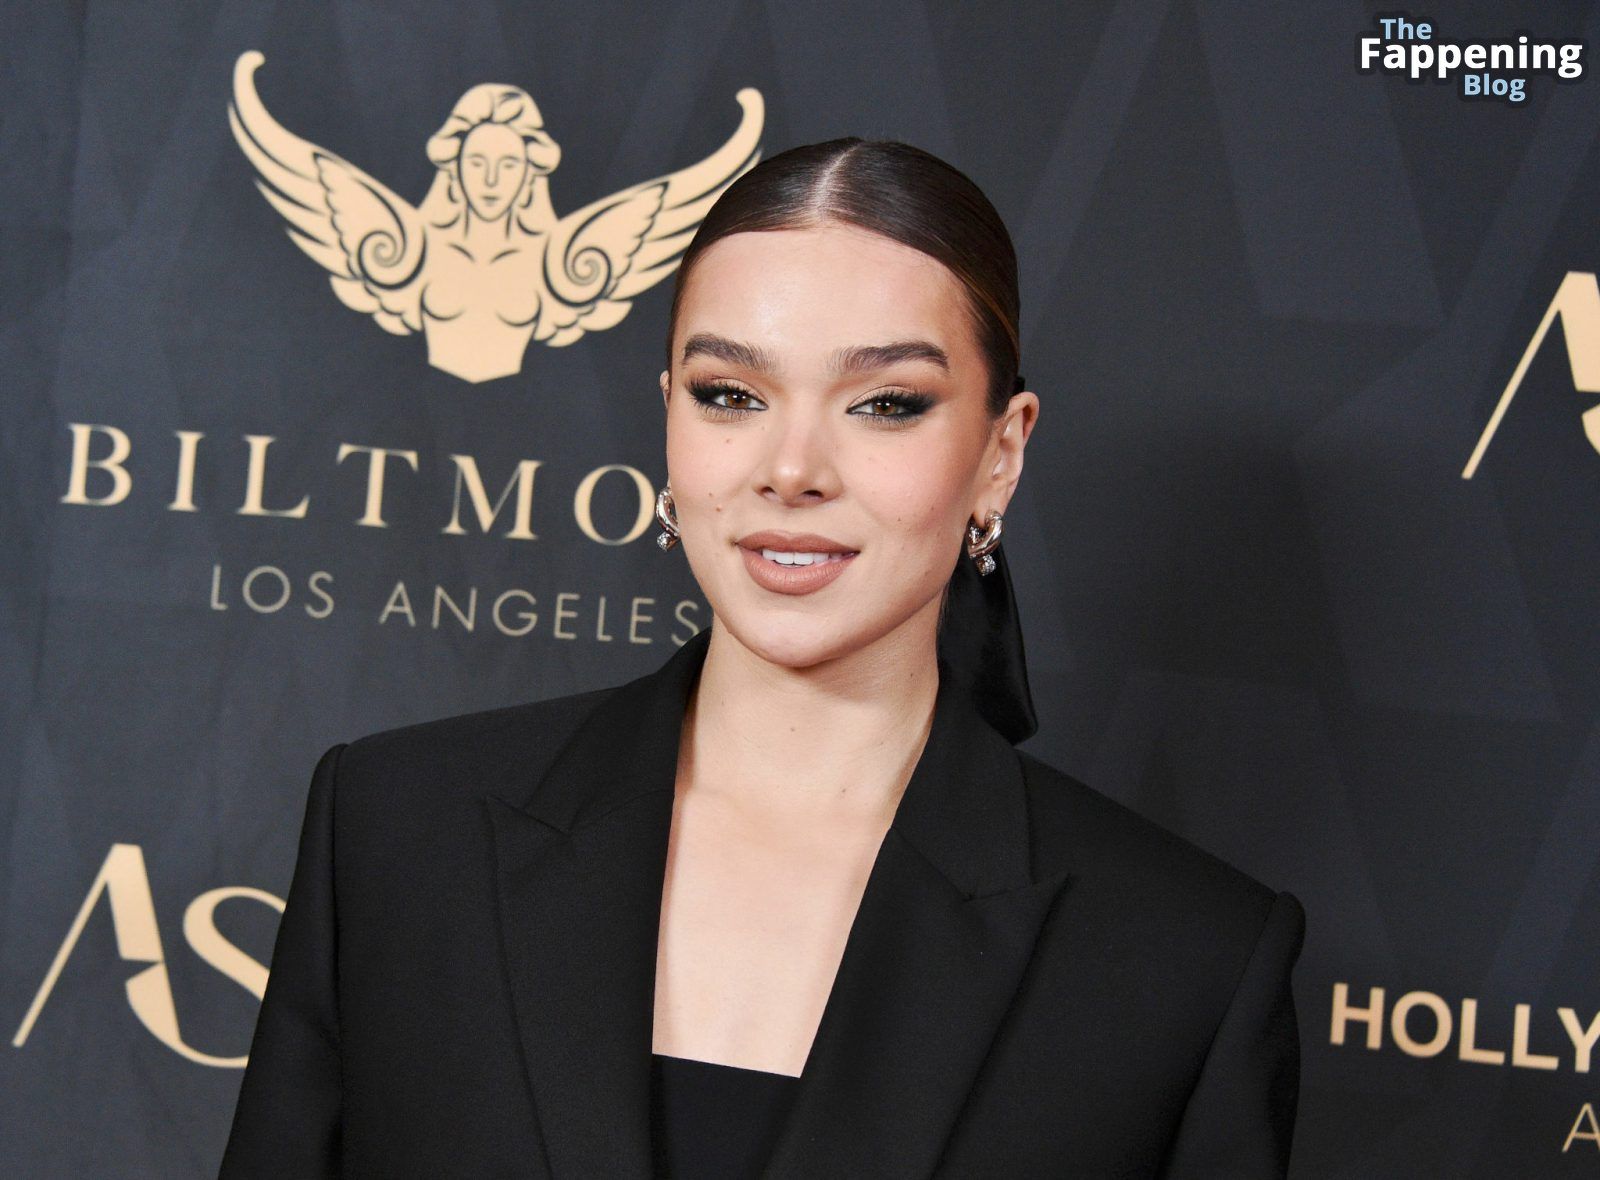 Hailee-Steinfeld-Black-Outfit-Astra-Film-Awards-20-thefappeningblog.com_.jpg